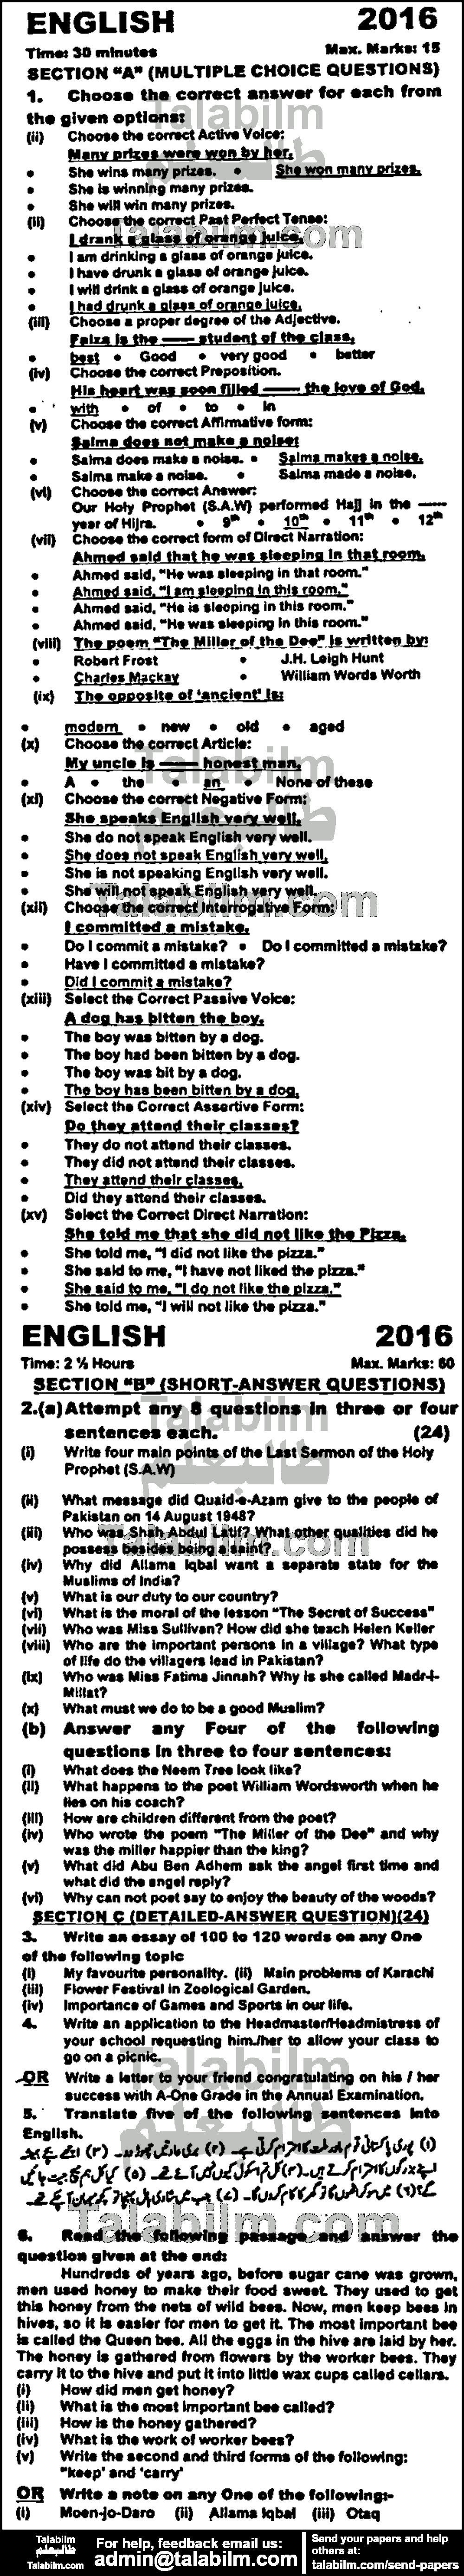 English 0 past paper for 2016 Group-I